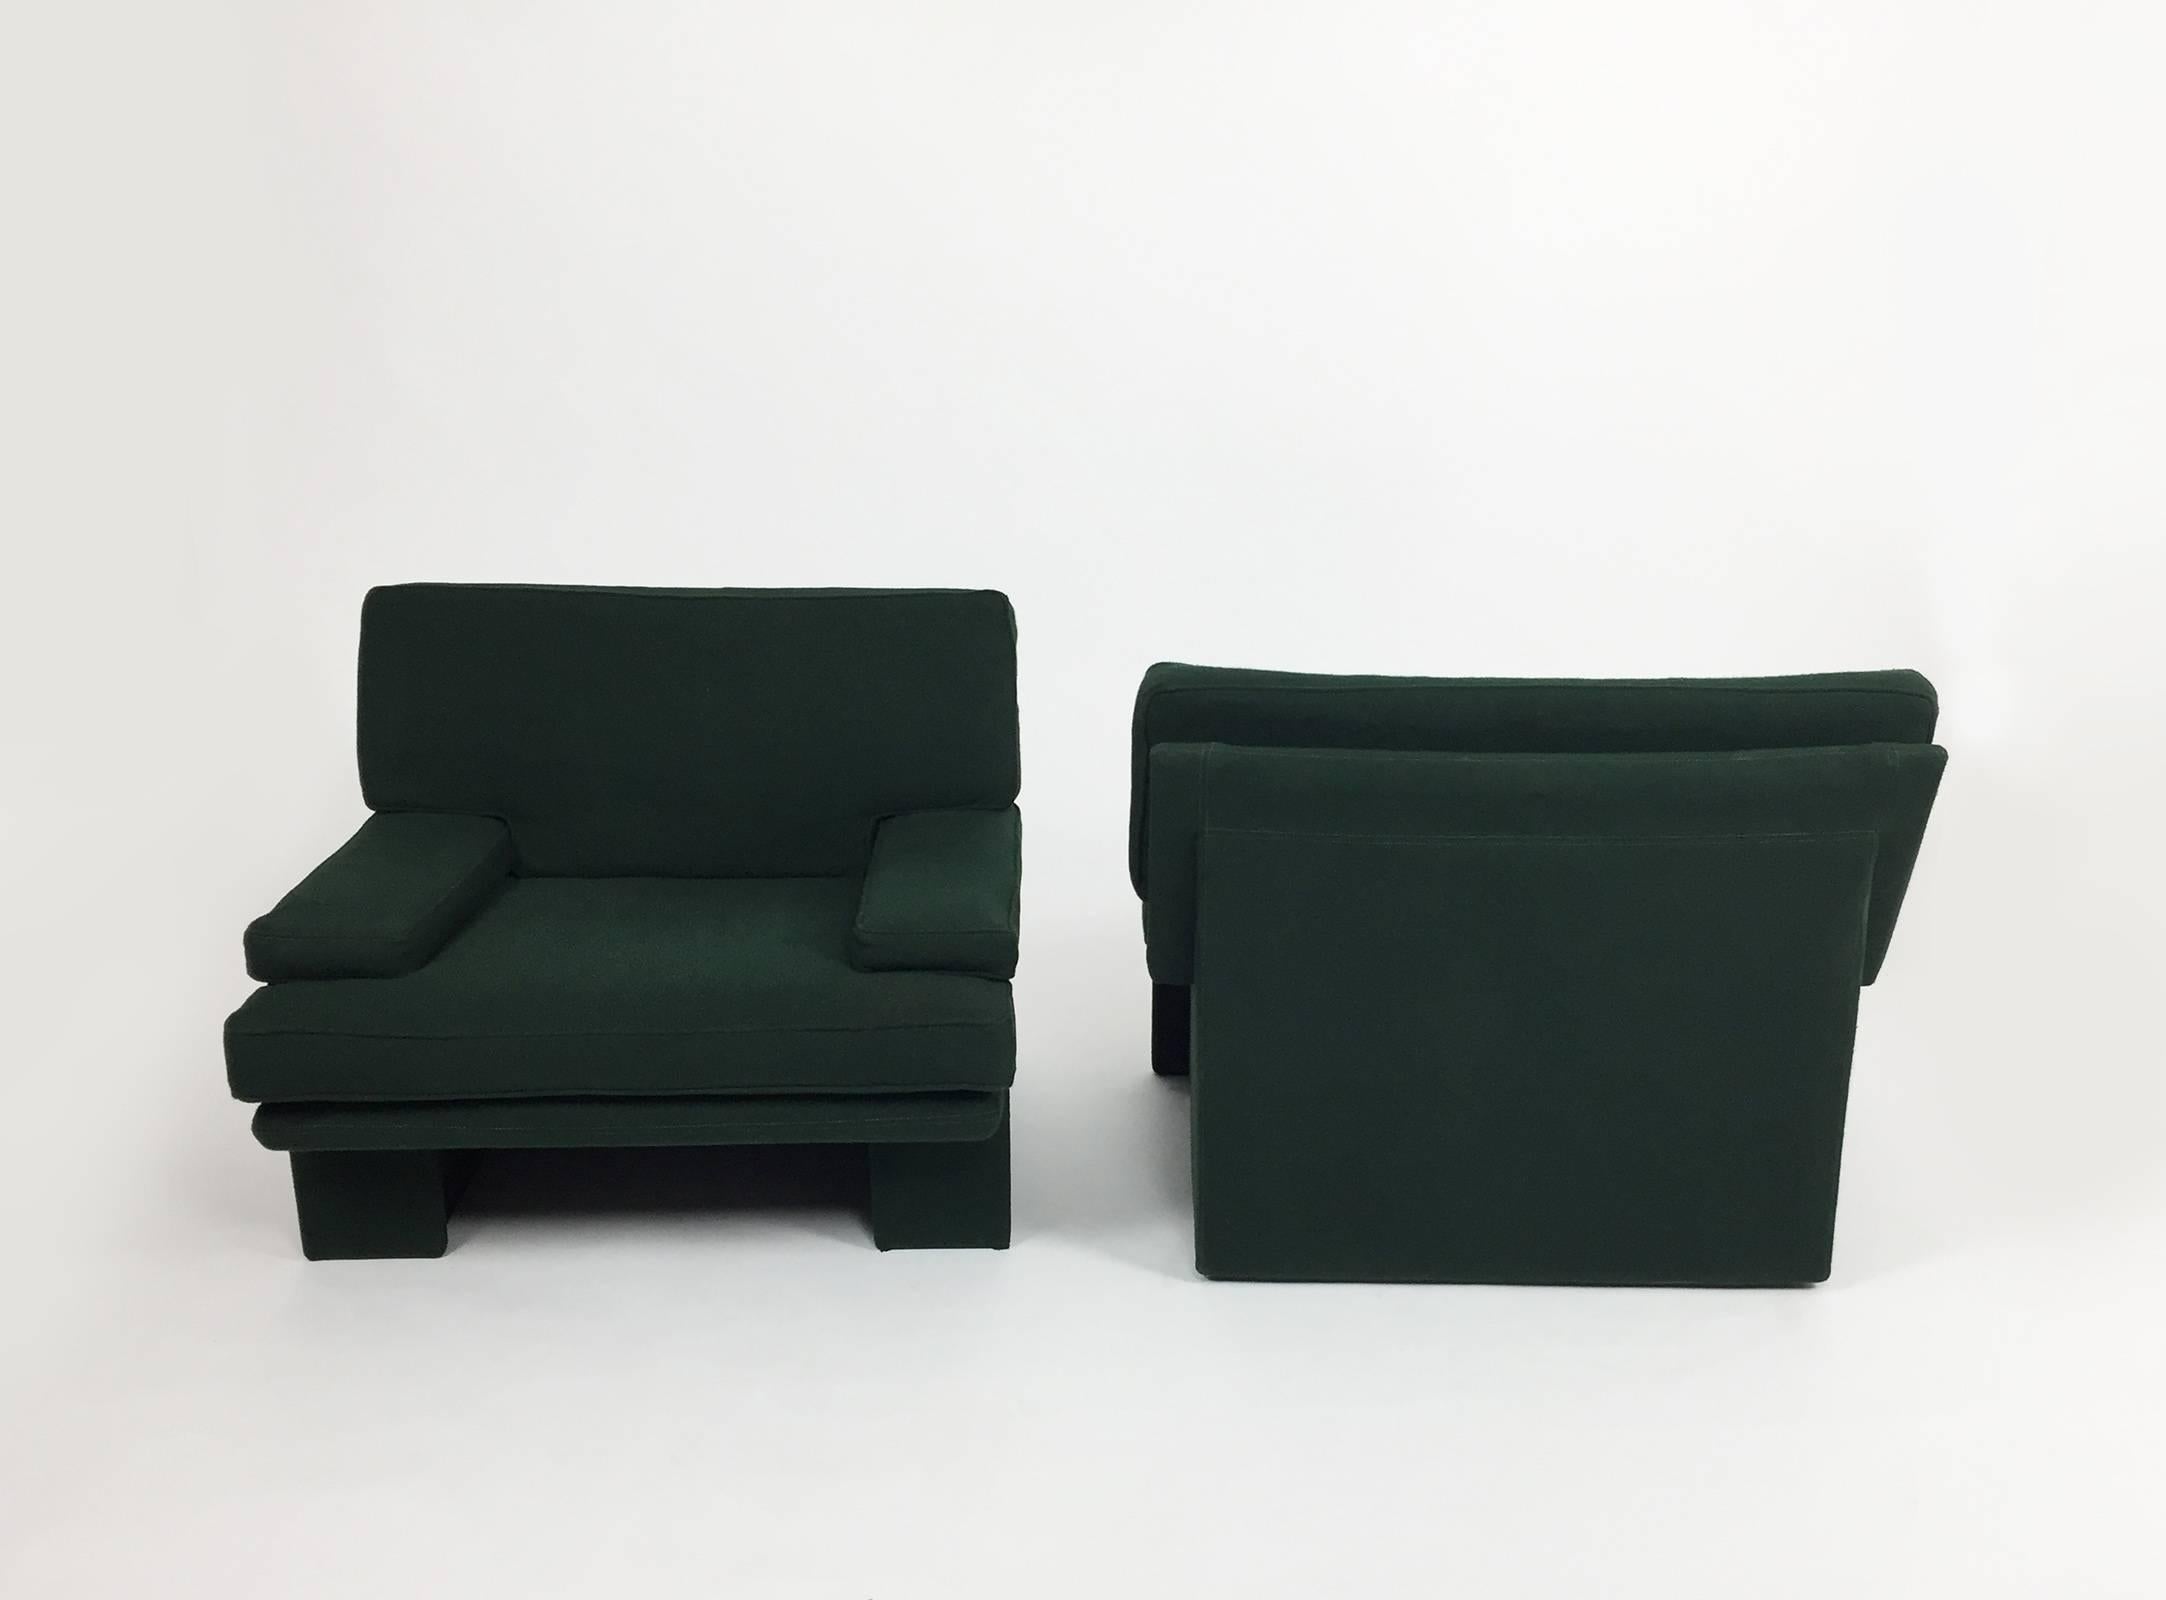 Pair of fully-upholstered Sirino armchairs designed by Walter Knoll. Original forest green wool upholstery in very good condition (see condition notes for specifics). Brayton International label under seat cushion, contrasting mint green stitching.